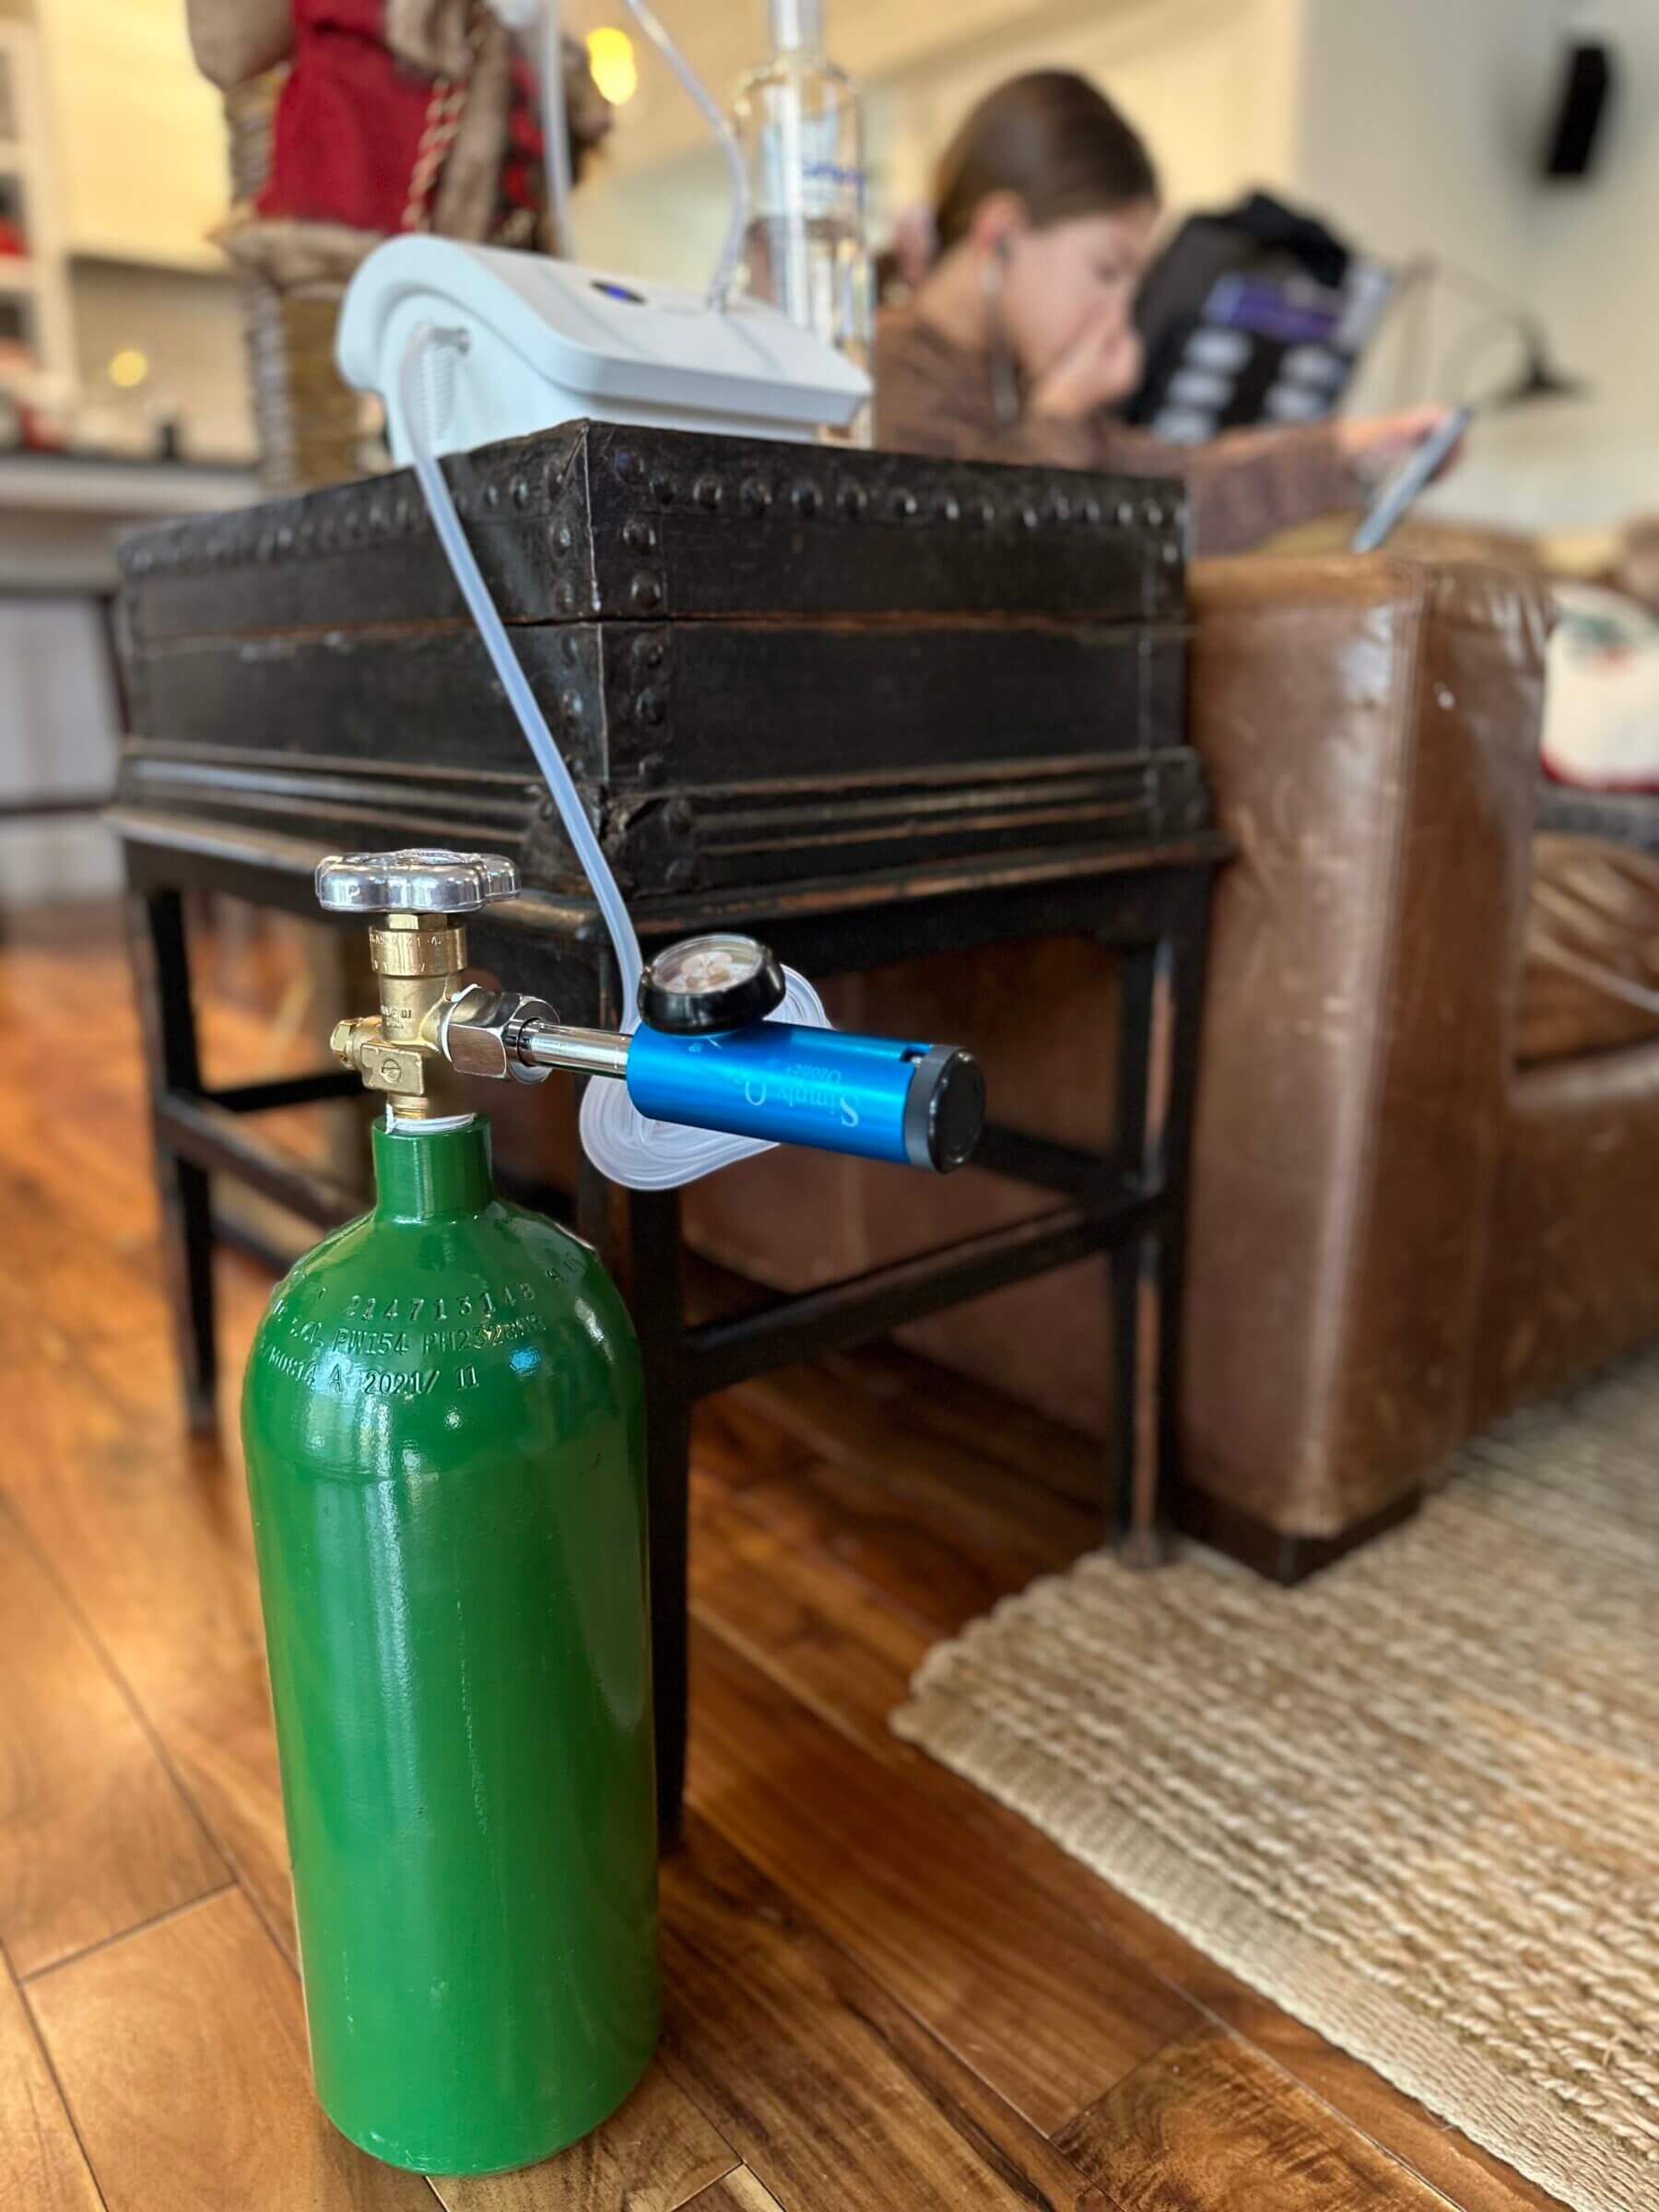 I purchased a 540 commercial oxygen tank from Airgas to feed our ozone generator.